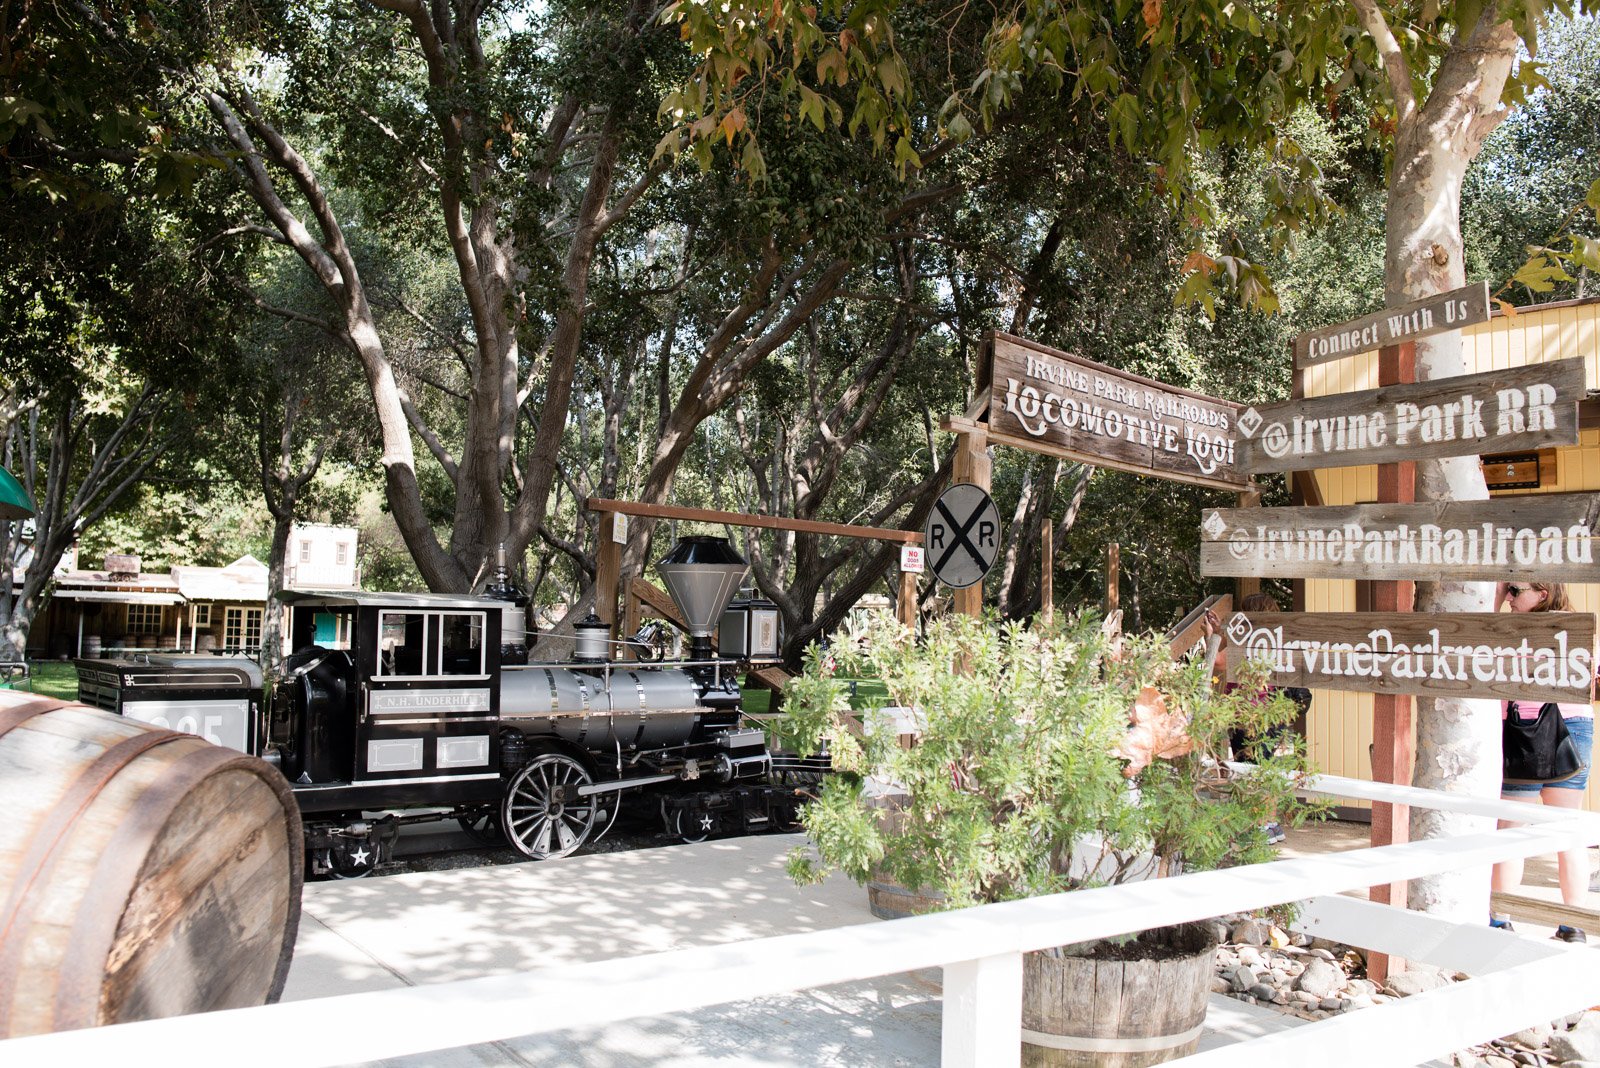 Tiffany Luong photographs Irvine Park Railroad for Westways